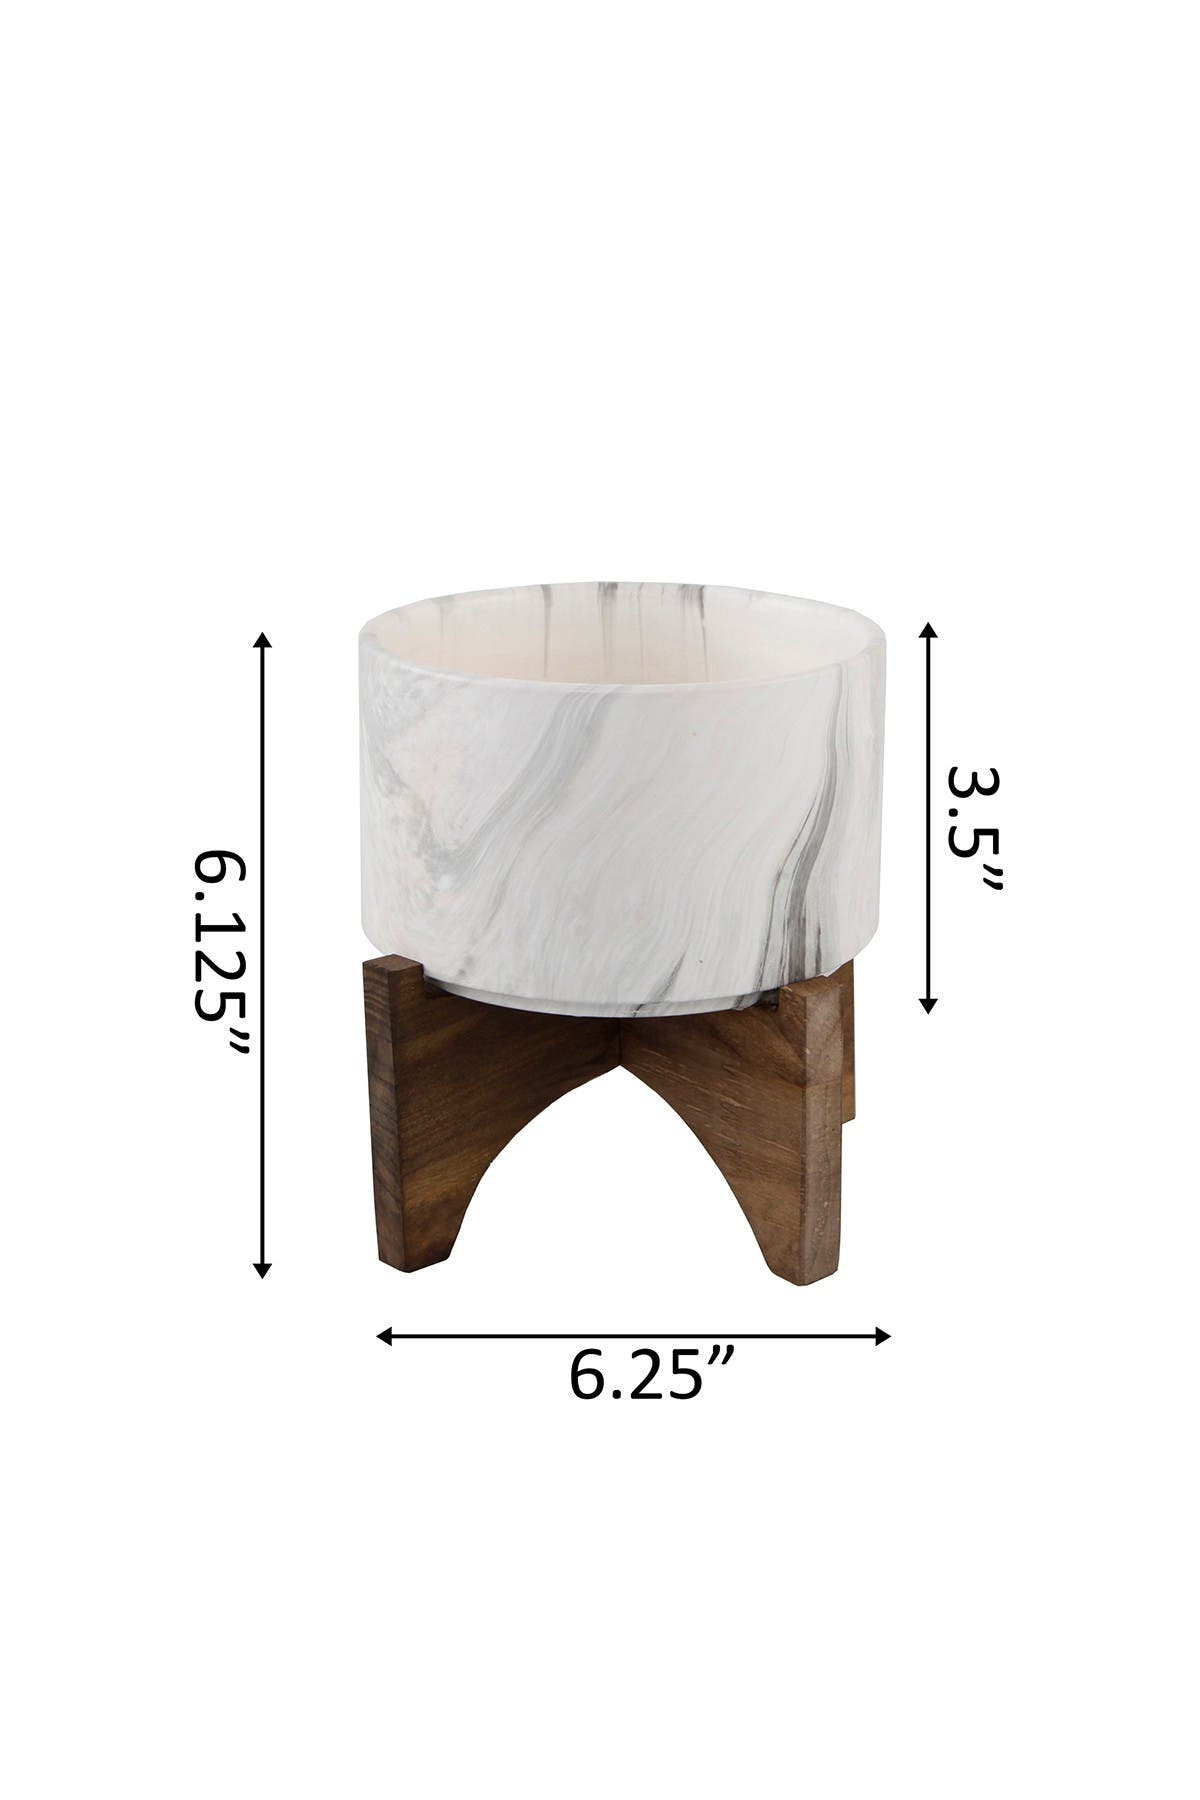 Flora Bunda Marble Finish Ceramic On Wood Stand In Open Miscellaneous